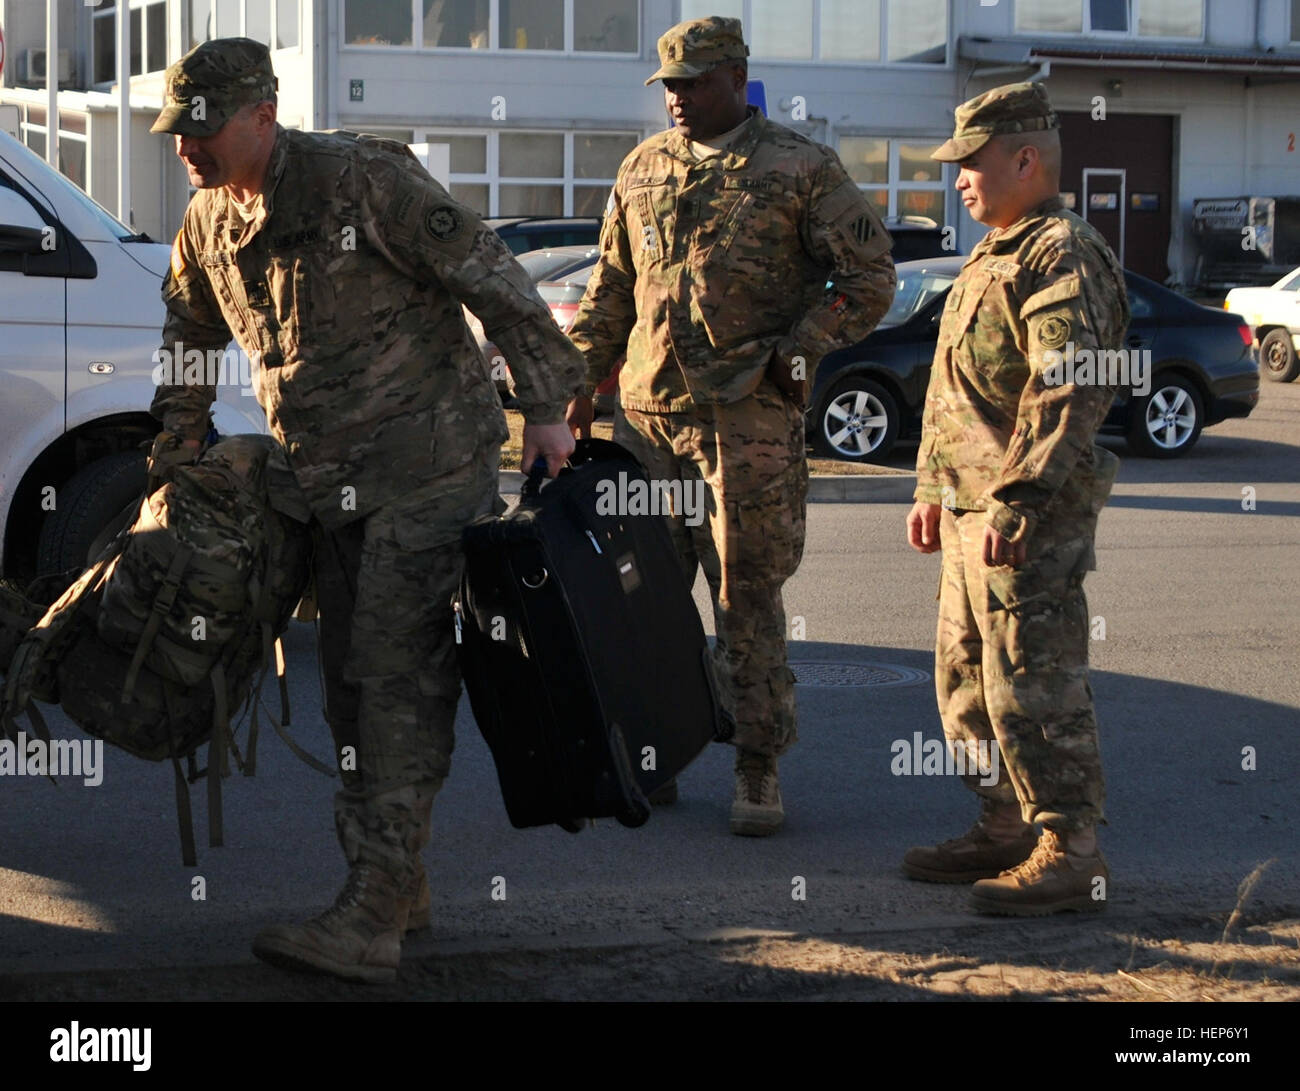 Lt. Col. Chad Chalfont, commander of the 2d Battalion, 7th Infantry  Regiment, 3d Infantry Division out of Fort Stewart, Ga., and Sgt. Maj. Anthony Walker Sgt. Maj. 2-7 Inf. Reg. arrived at Adazi Military Base, Latvia, on March 16, 2015. The unit was deployed throughout the Baltic region in support of Operation  Atlantic Resolve and will be taking over for the 3rd Squadron, 2d Cavalry Regiment. First Brigade, 3d Infantry Division is the U.S. Army’s current regionally aligned force  for Europe. They will spend the next three months training alongside NATO allies and work together to build inter Stock Photo